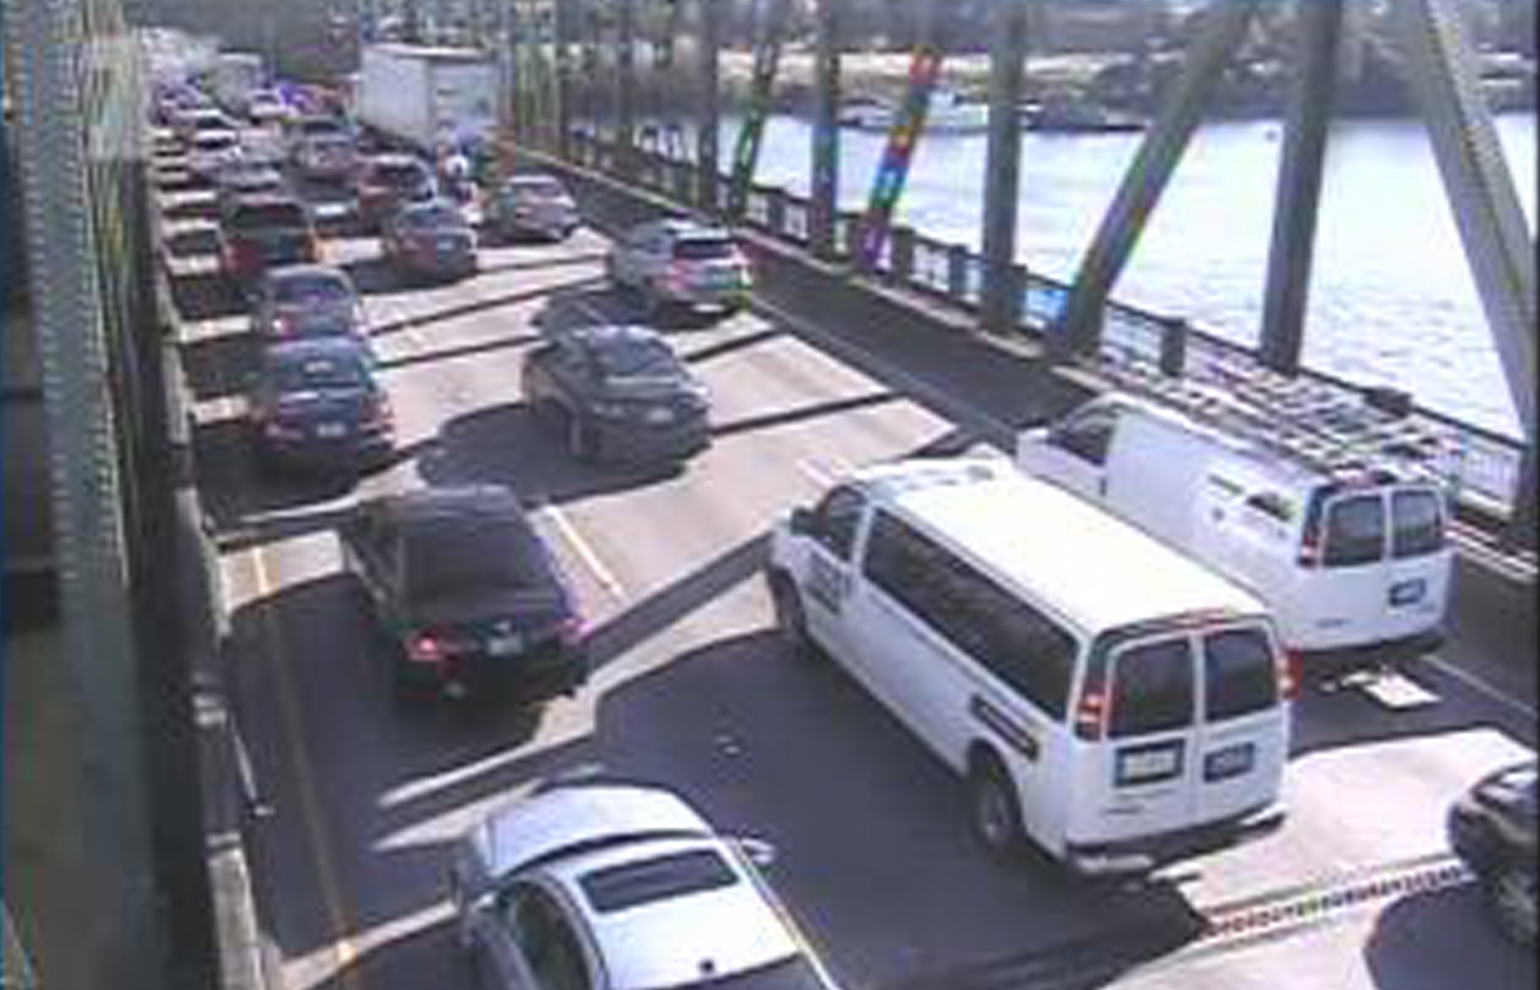 This traffic cam image shows traffic at the sound end of the southbound lanes on the Interstate 5 Bridge at a standstill at 5:53 p.m. Sunday, a little more than an hour after a fatal crash on I-5 just south of the bridge.